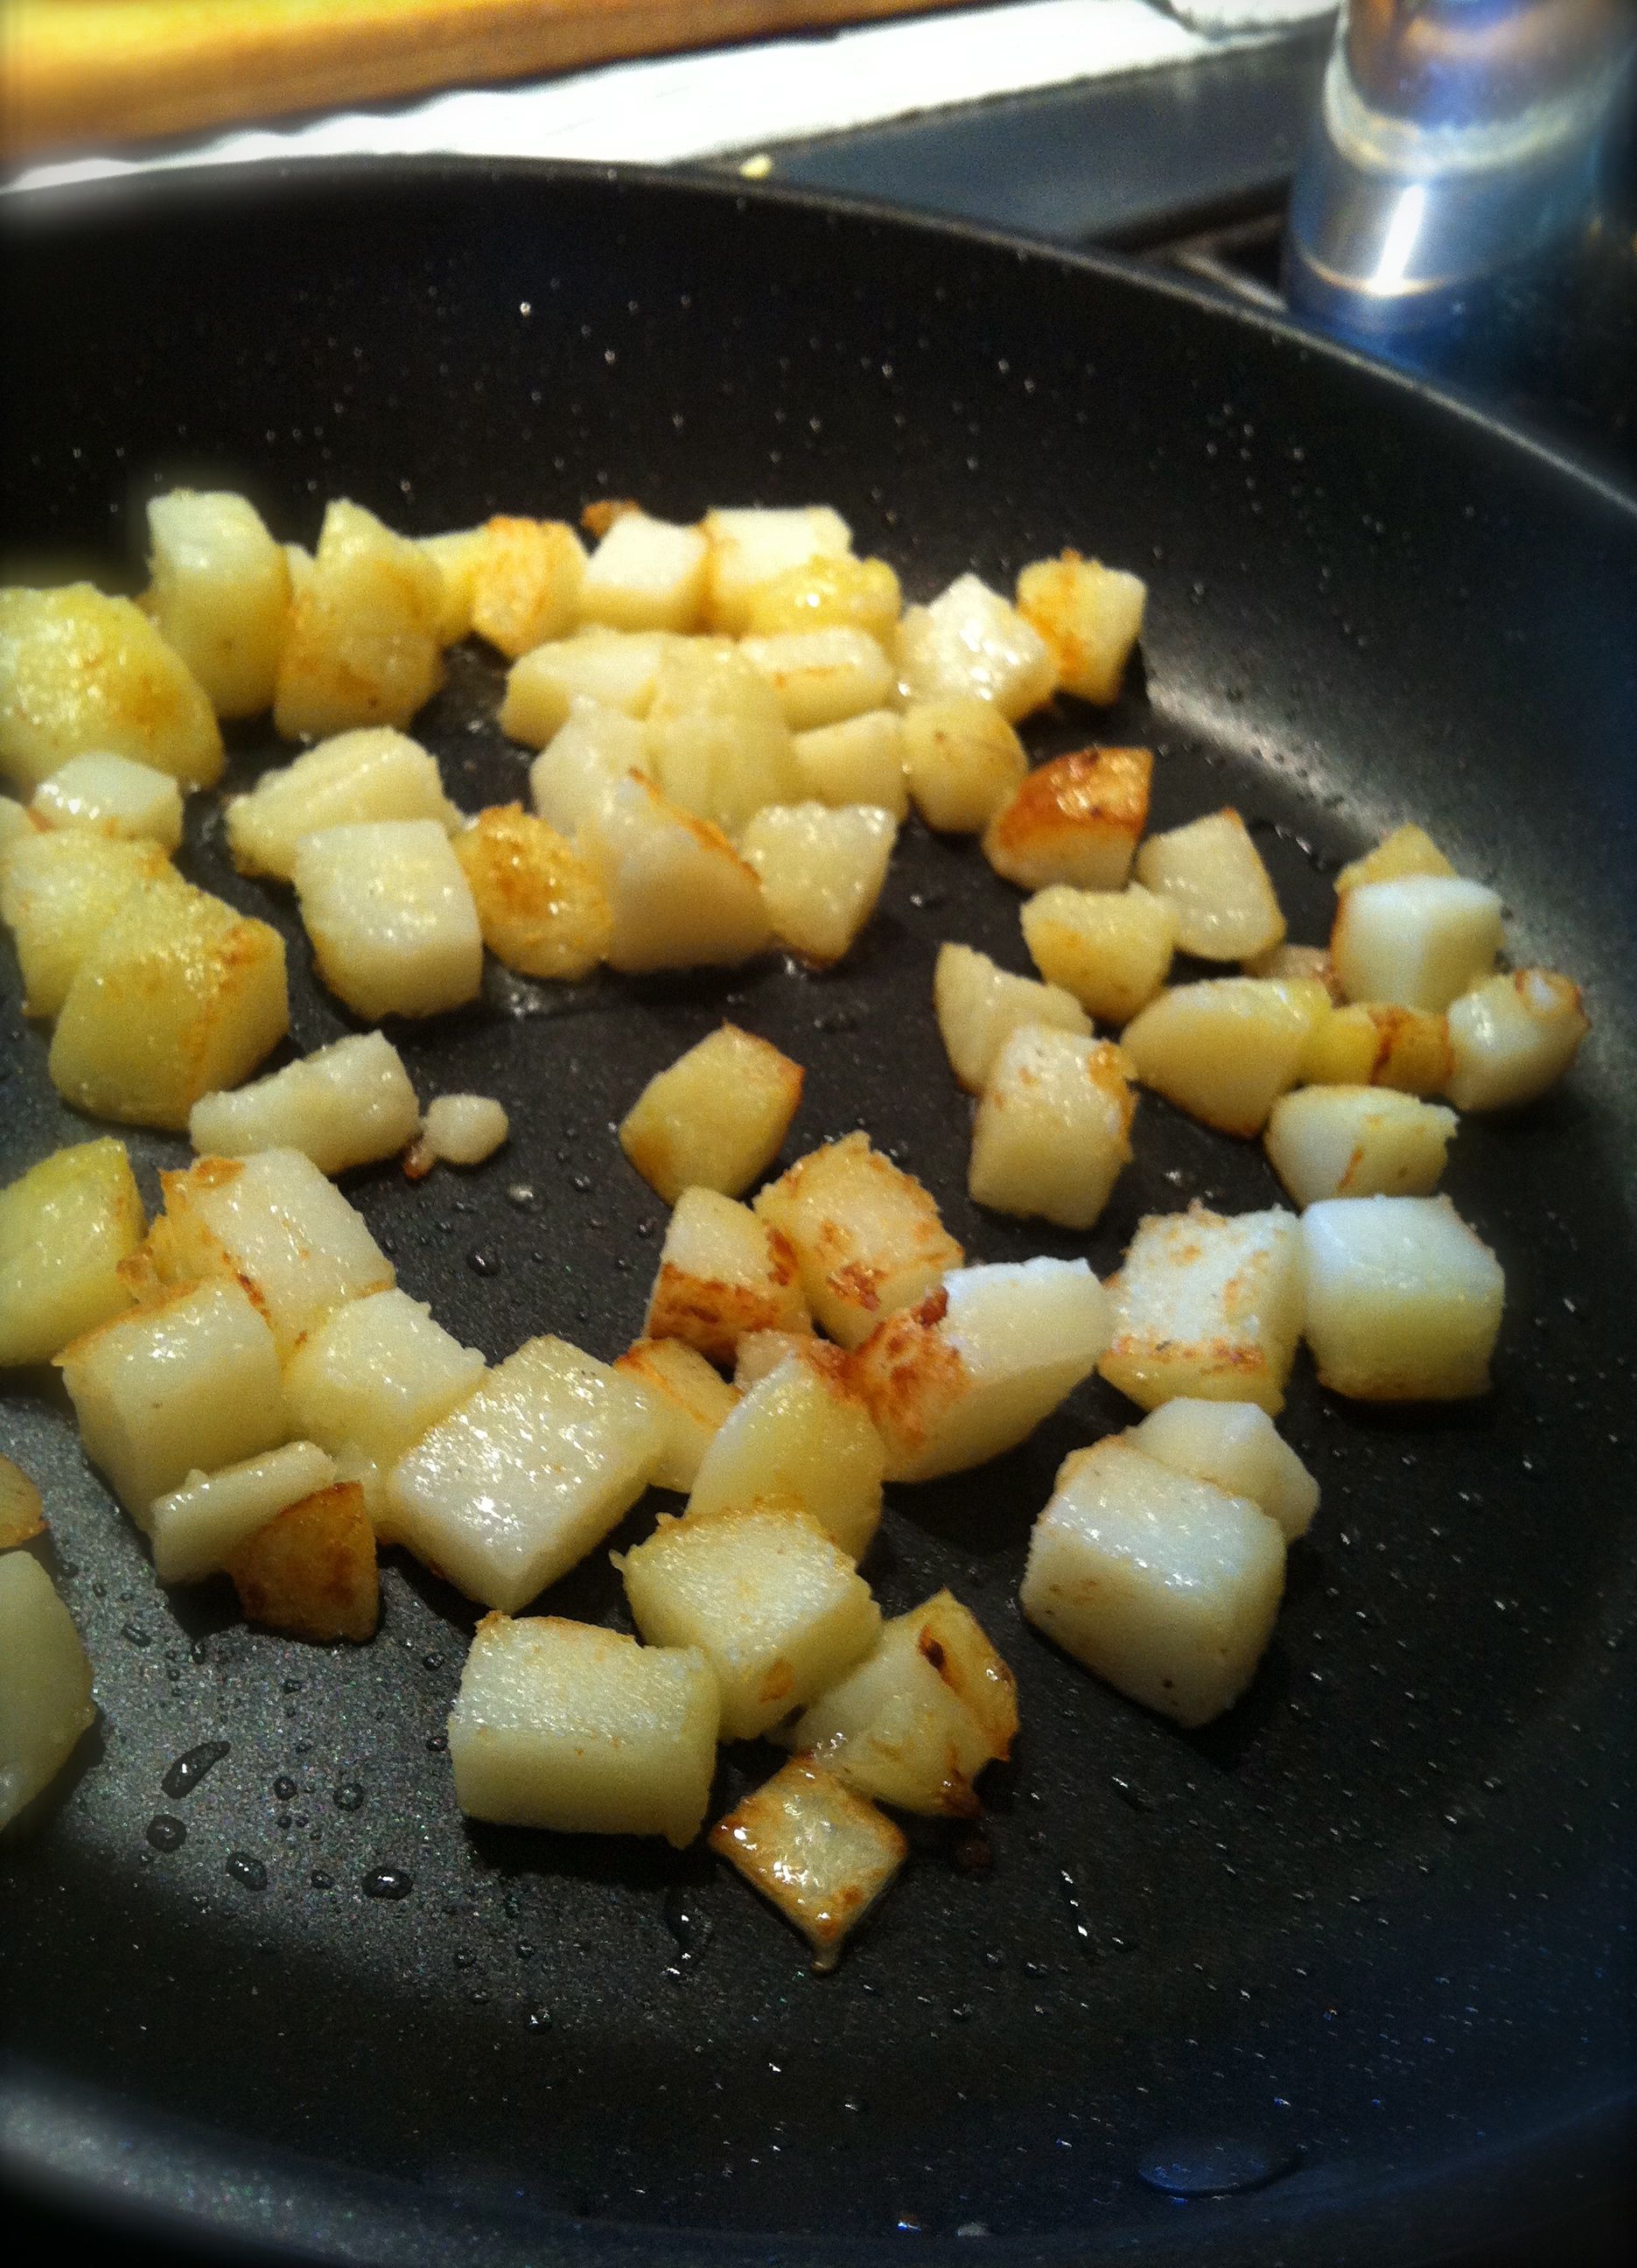 Texas Mexican Potataoes start with cooking the potatoes in a little vegetable oil until they get crispy.